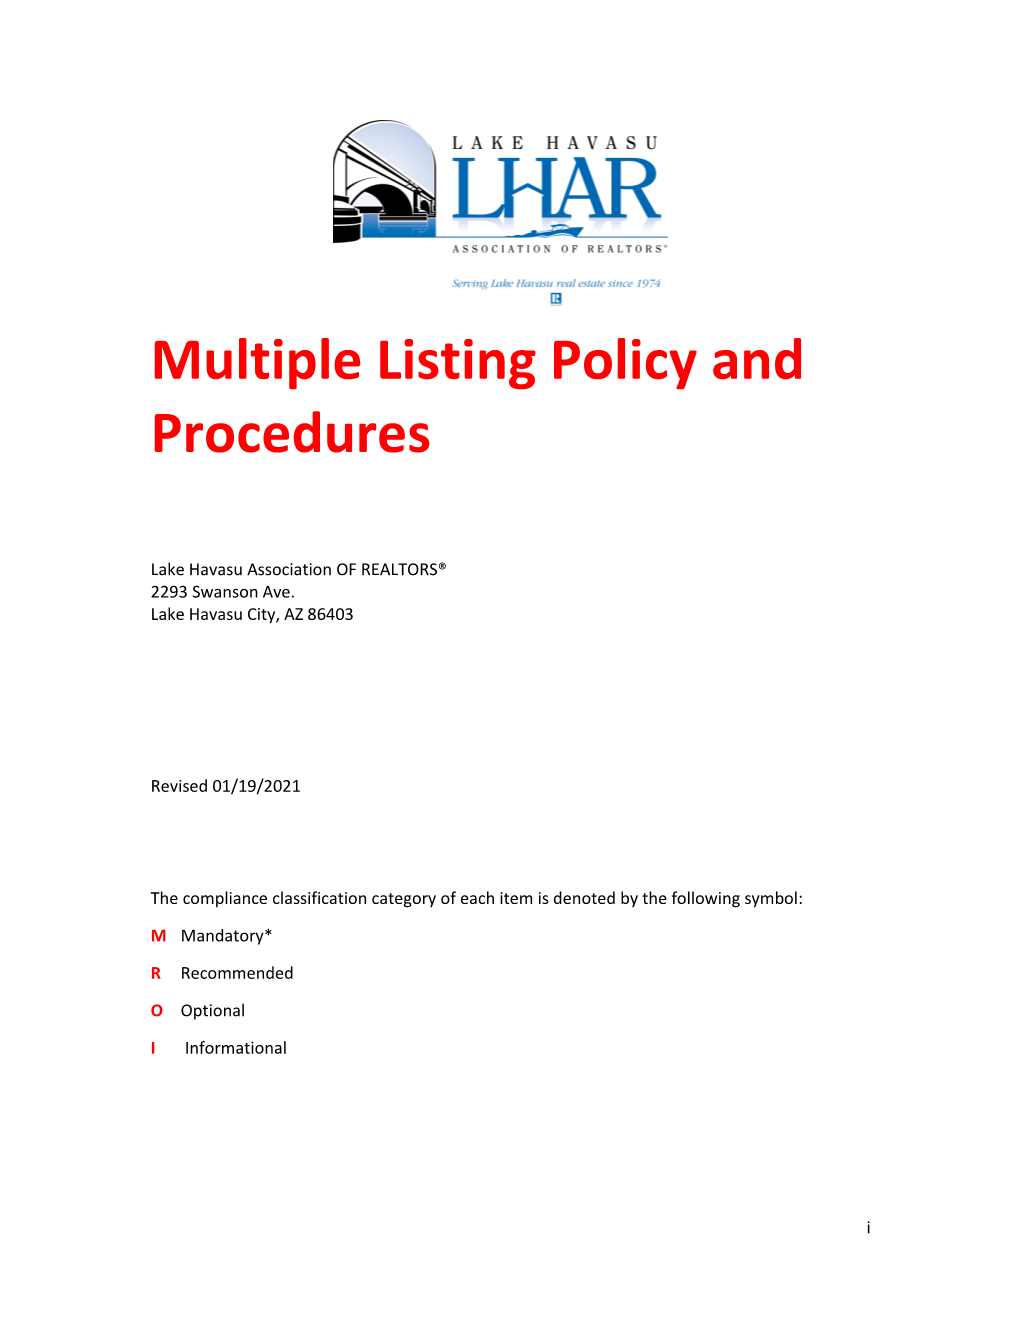 Multiple Listing Policy and Procedures